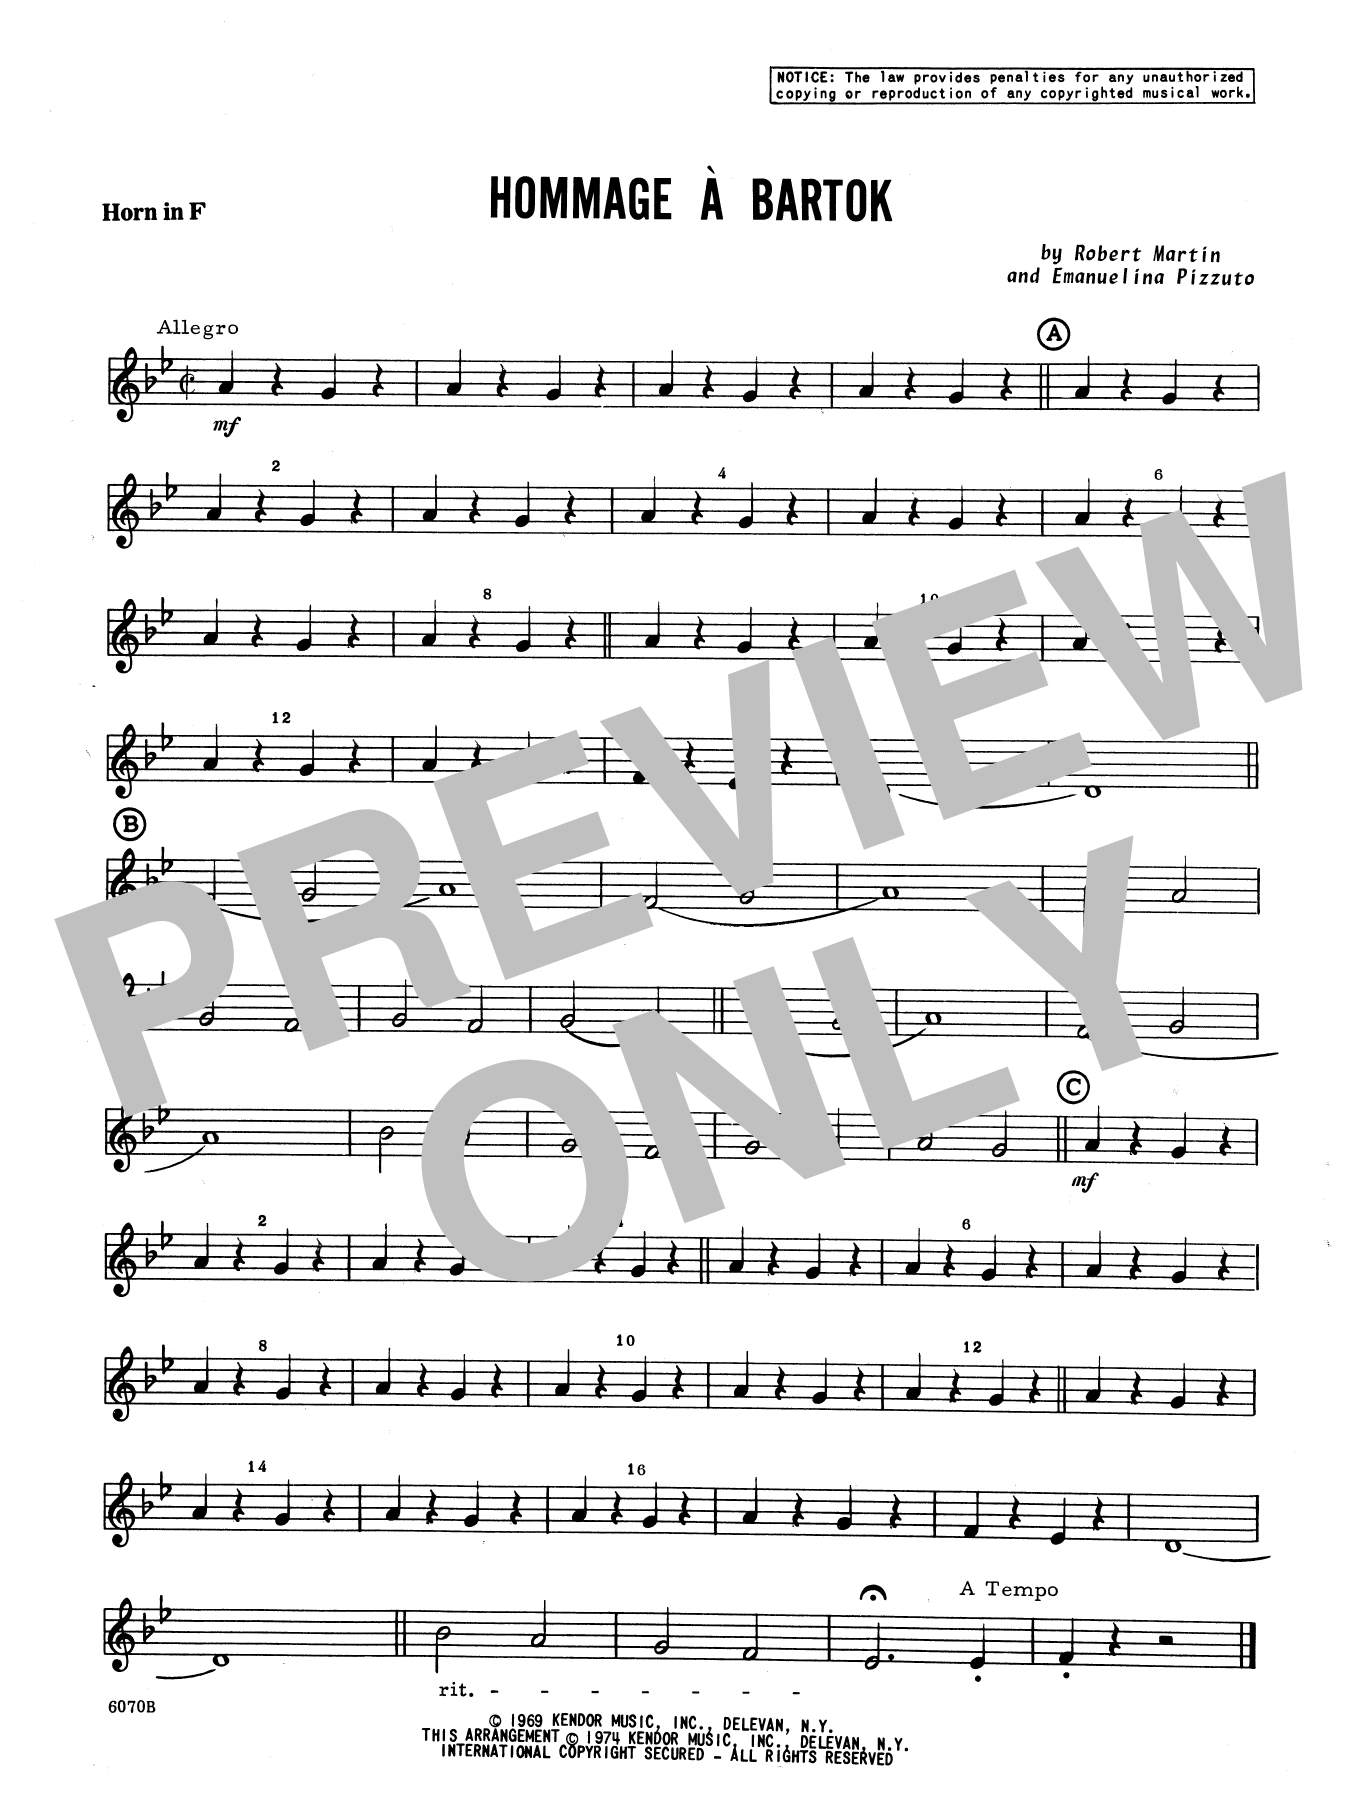 Martin Hommage A Bartok - Horn in F sheet music notes and chords. Download Printable PDF.